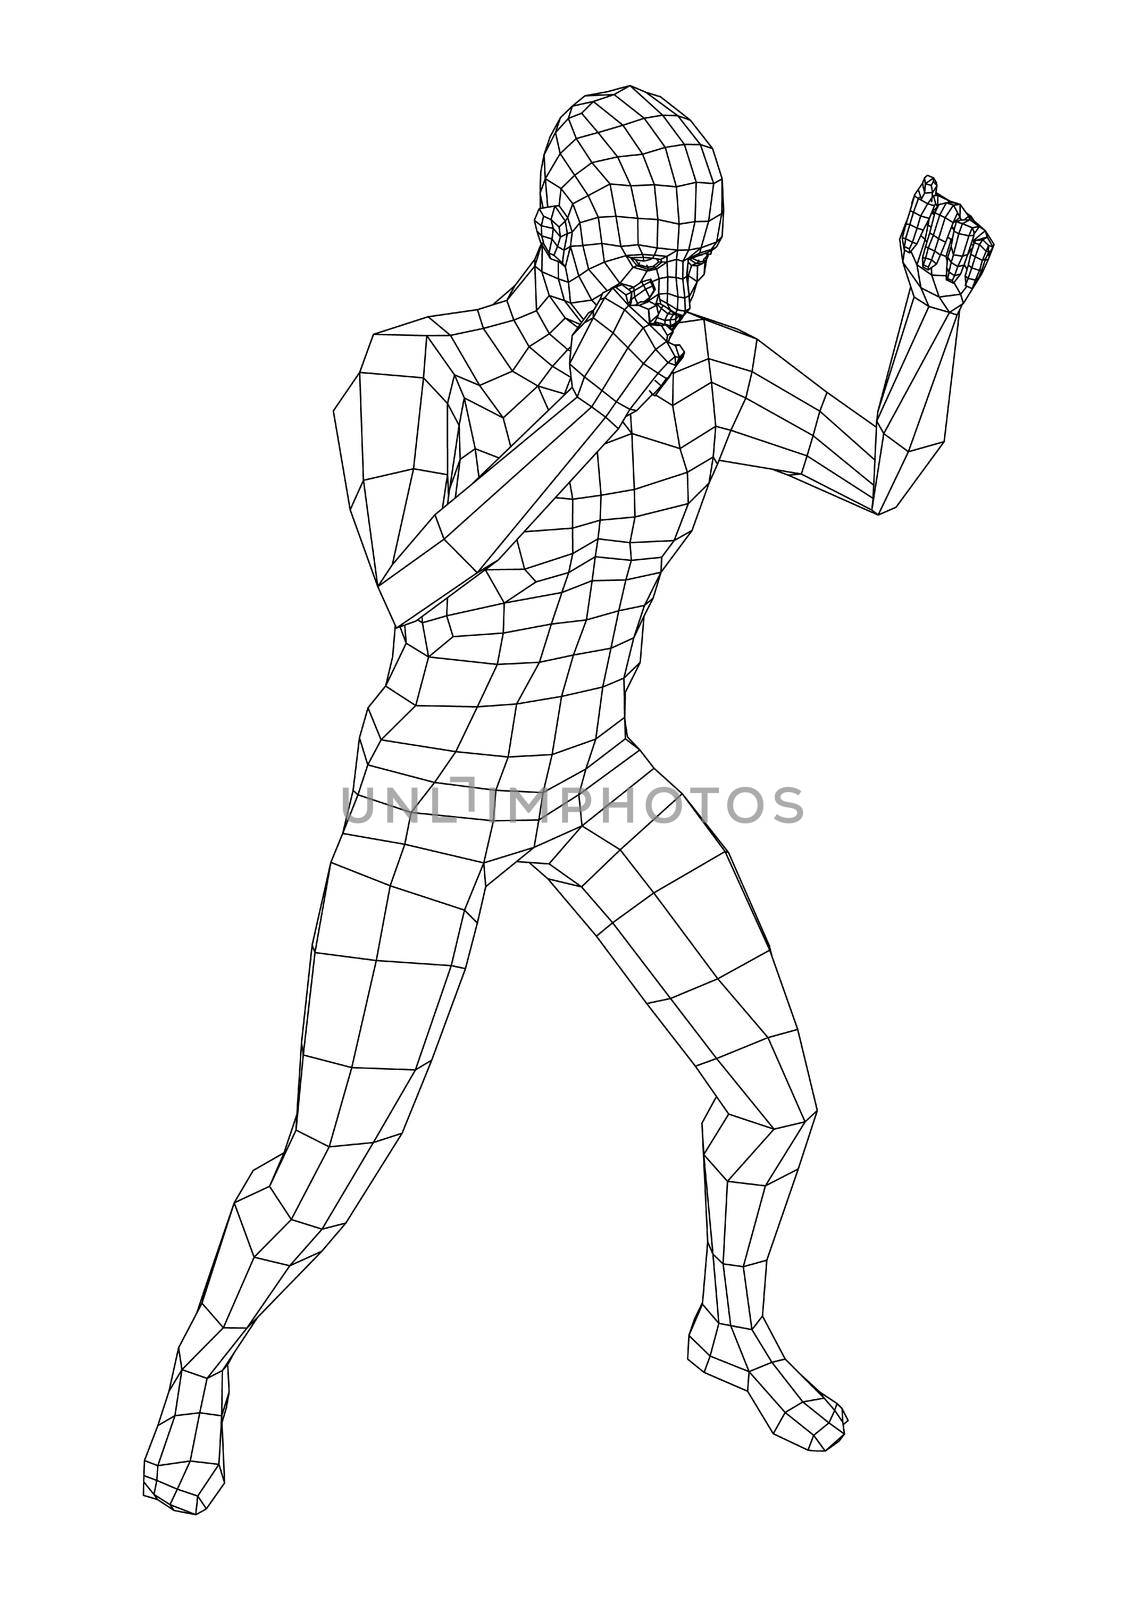 Wireframe boxing man. 3d illustration by cherezoff